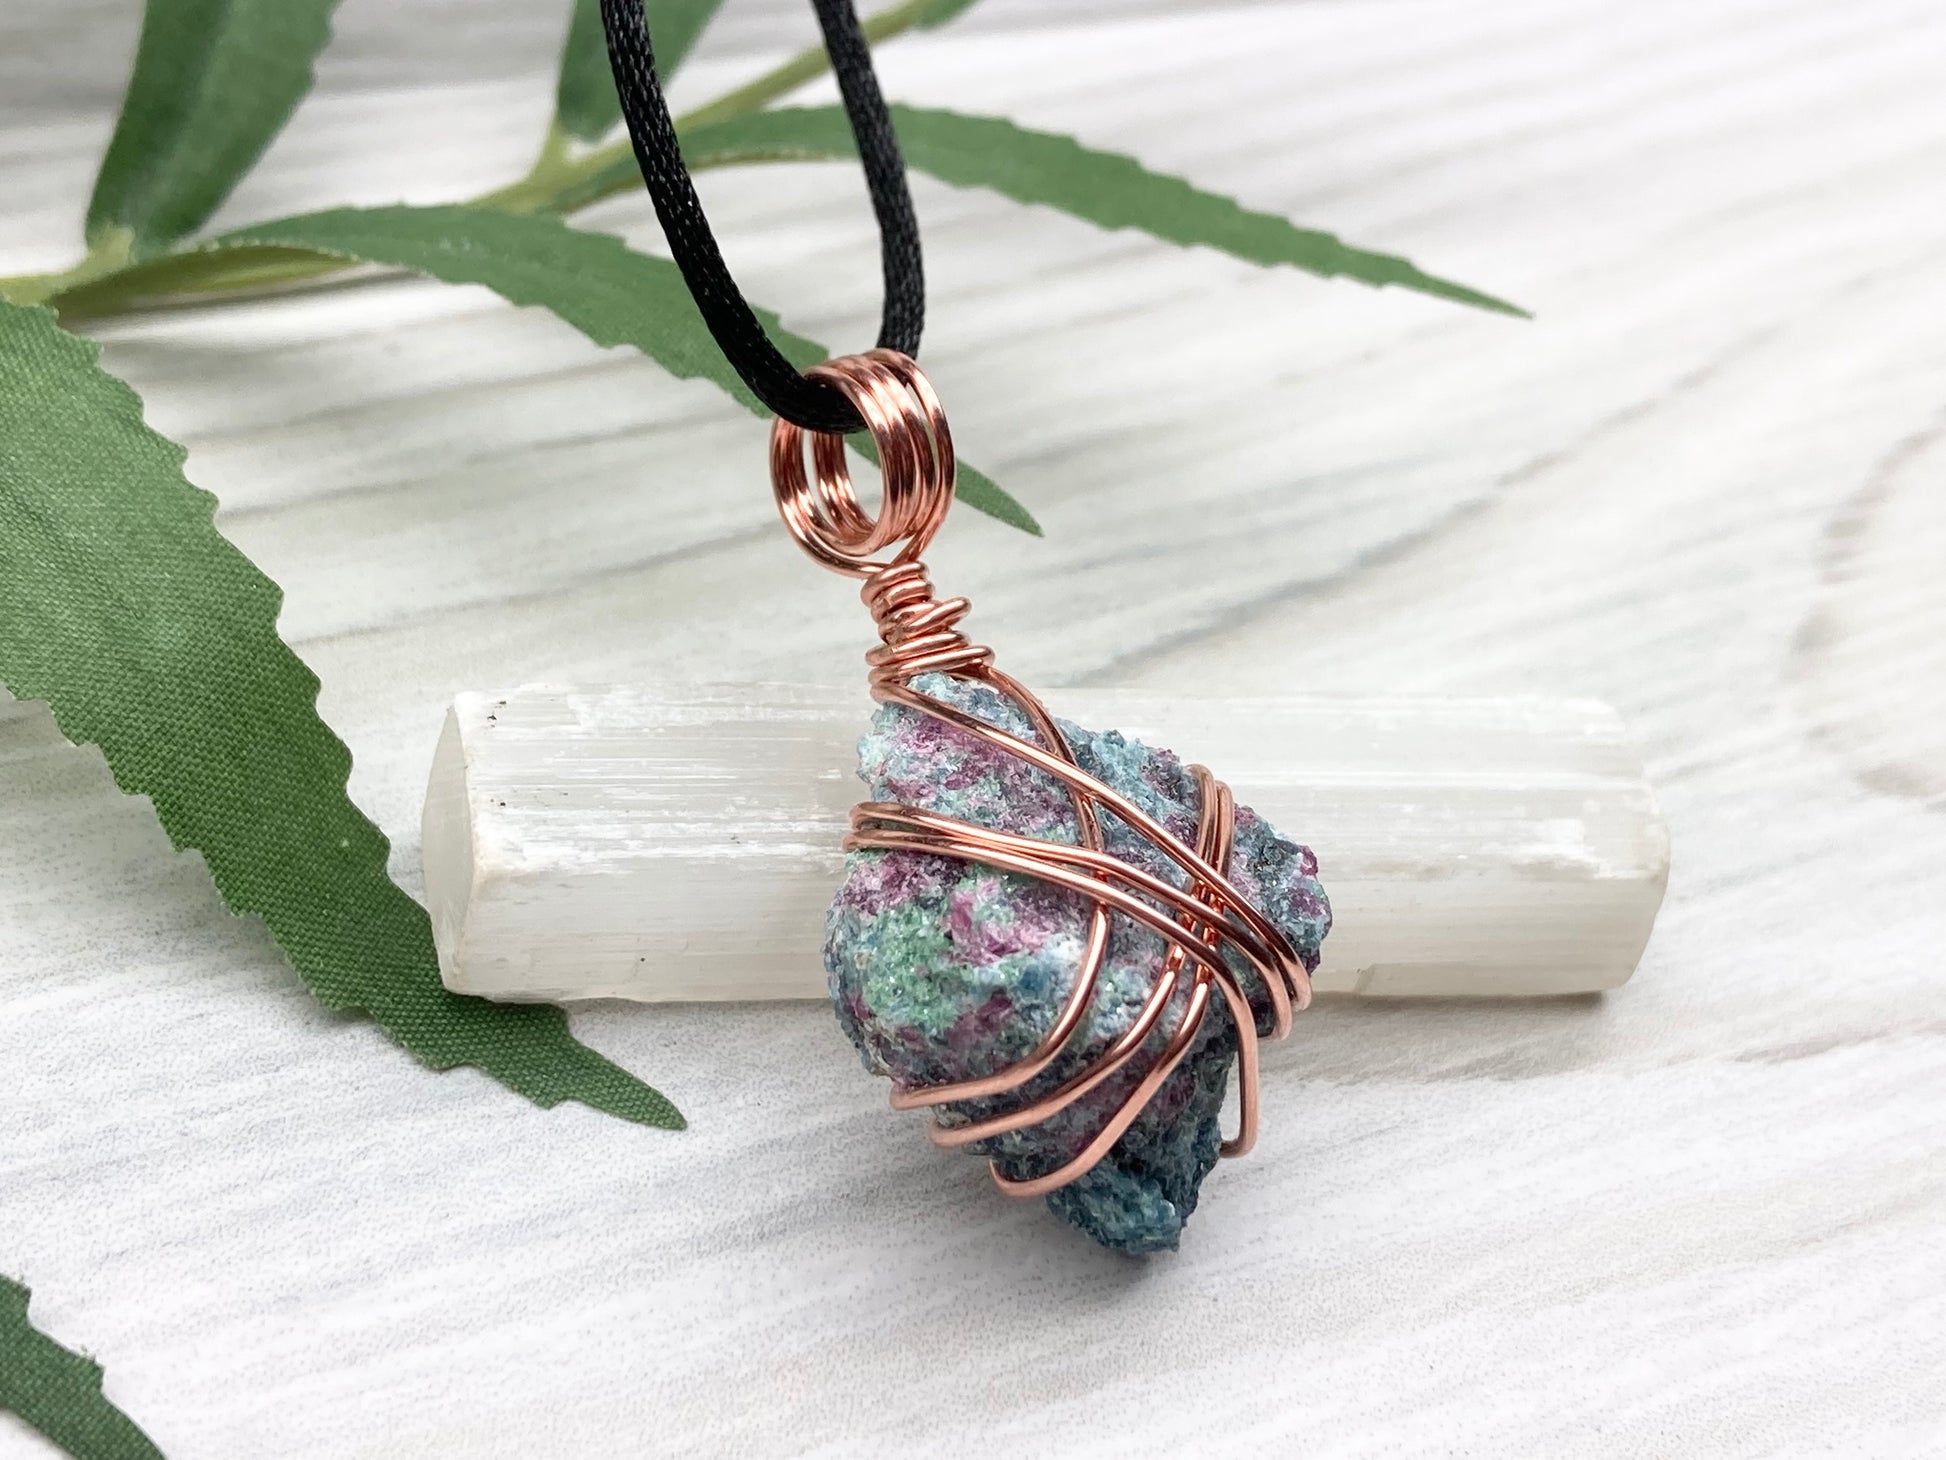 Rough Raw Ruby Zoisite Necklace. Right Side View. This Ruby Zoisite Crystal Is Hand Wrapped With Pure Copper Wire. This Stone is Blue and Red Colored. Gemstone Comes On A Black Chain. Spiritual New Age Style Unisex Jewelry.